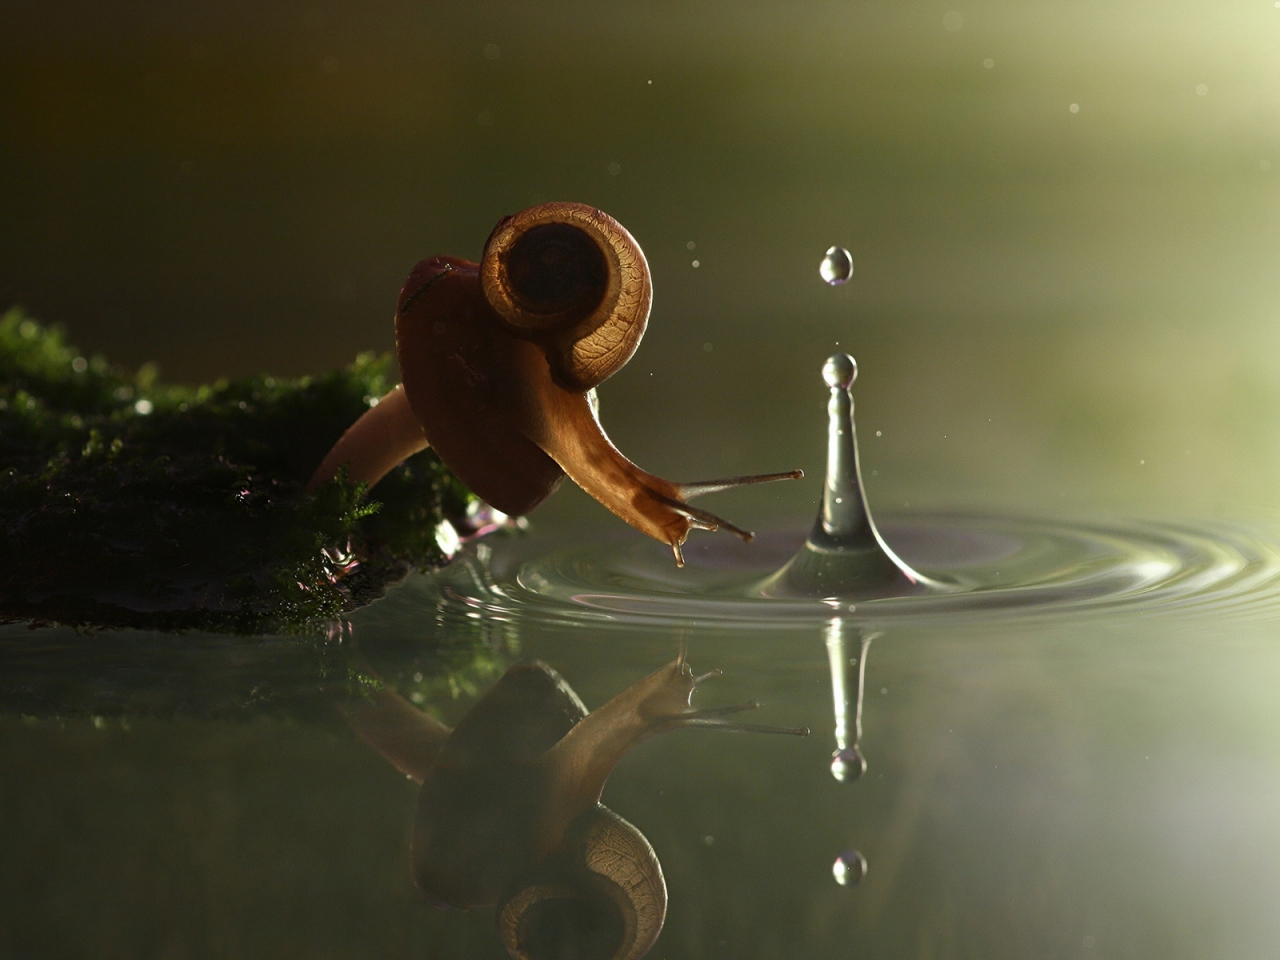 Falling Snail for 1280 x 960 resolution